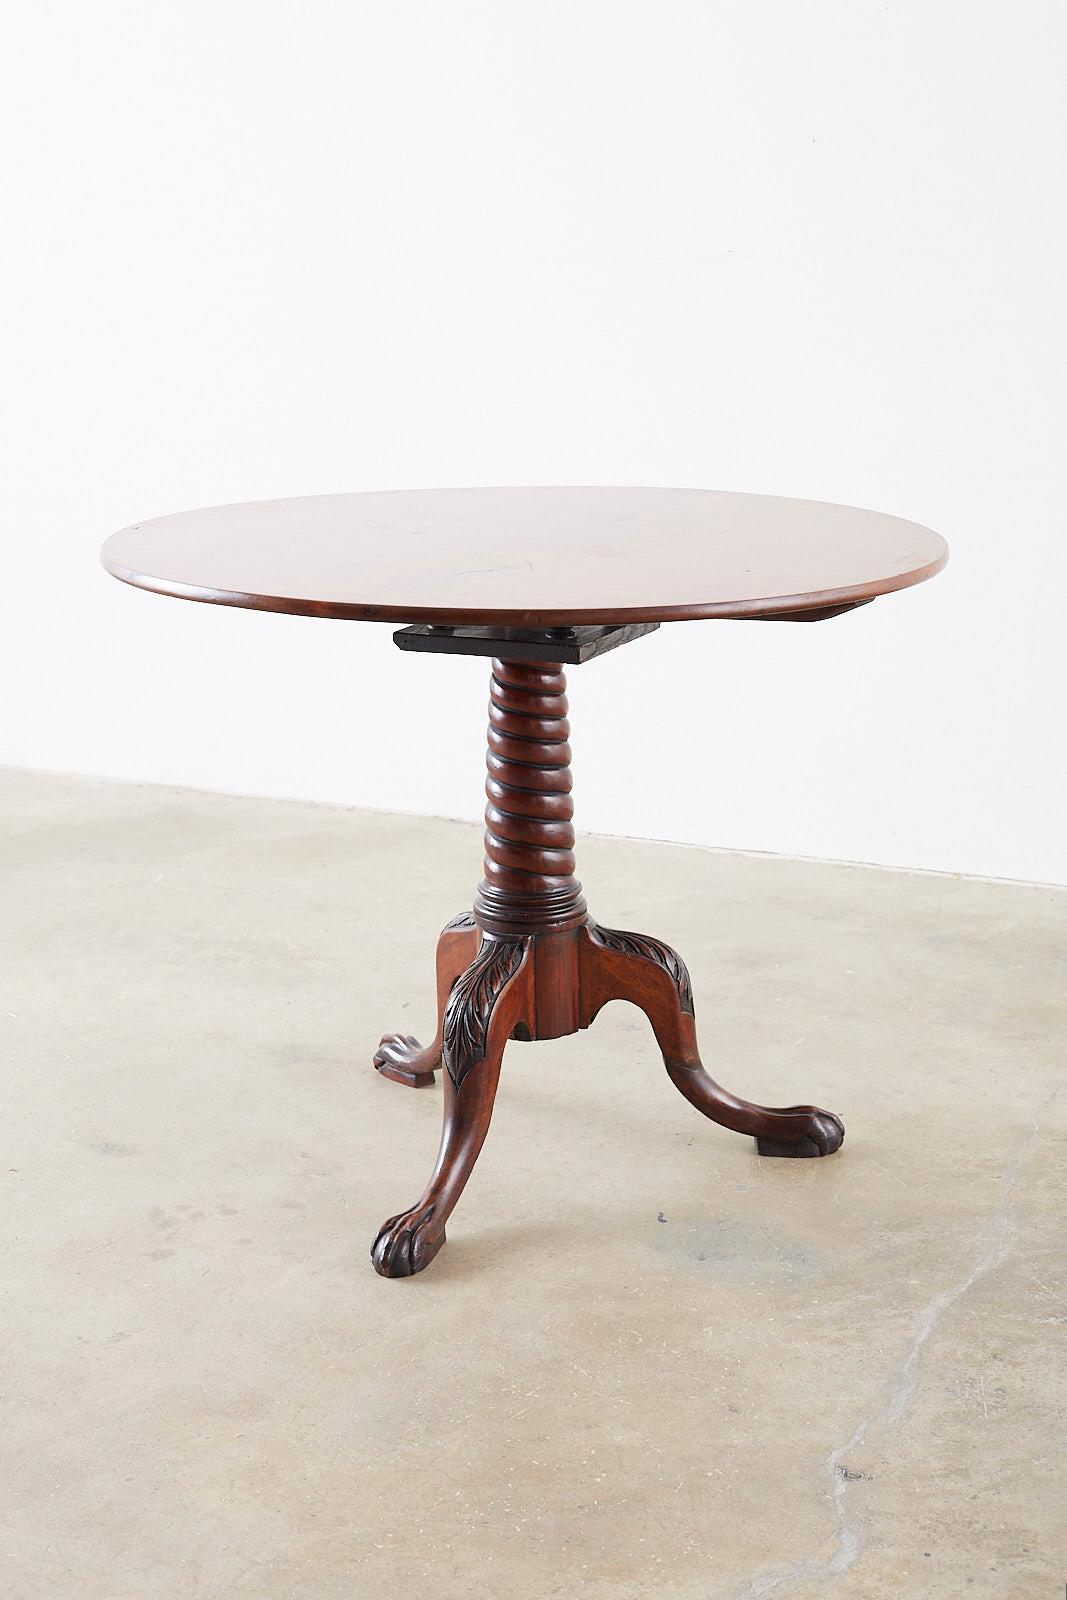 Hand-Crafted 19th Georgian Mahogany Round Tilt-Top Table